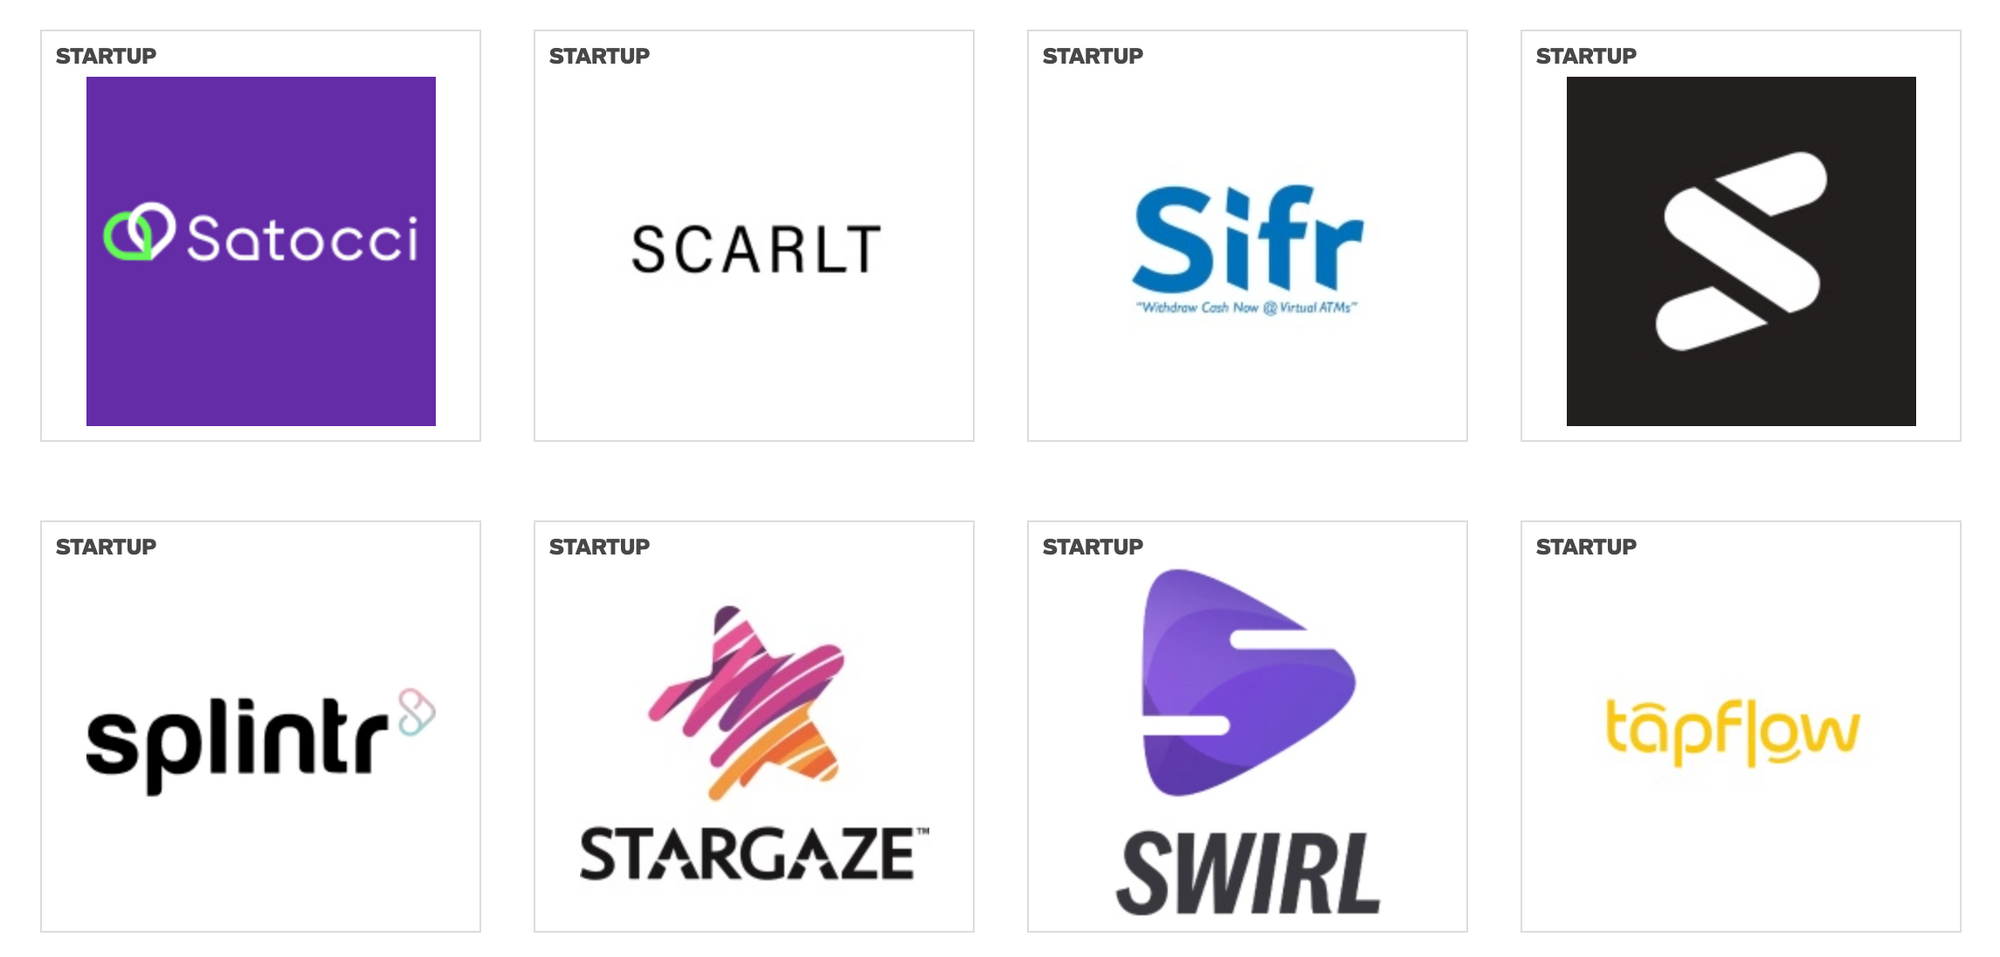 A few of the startups exhibiting at the Startup Village.